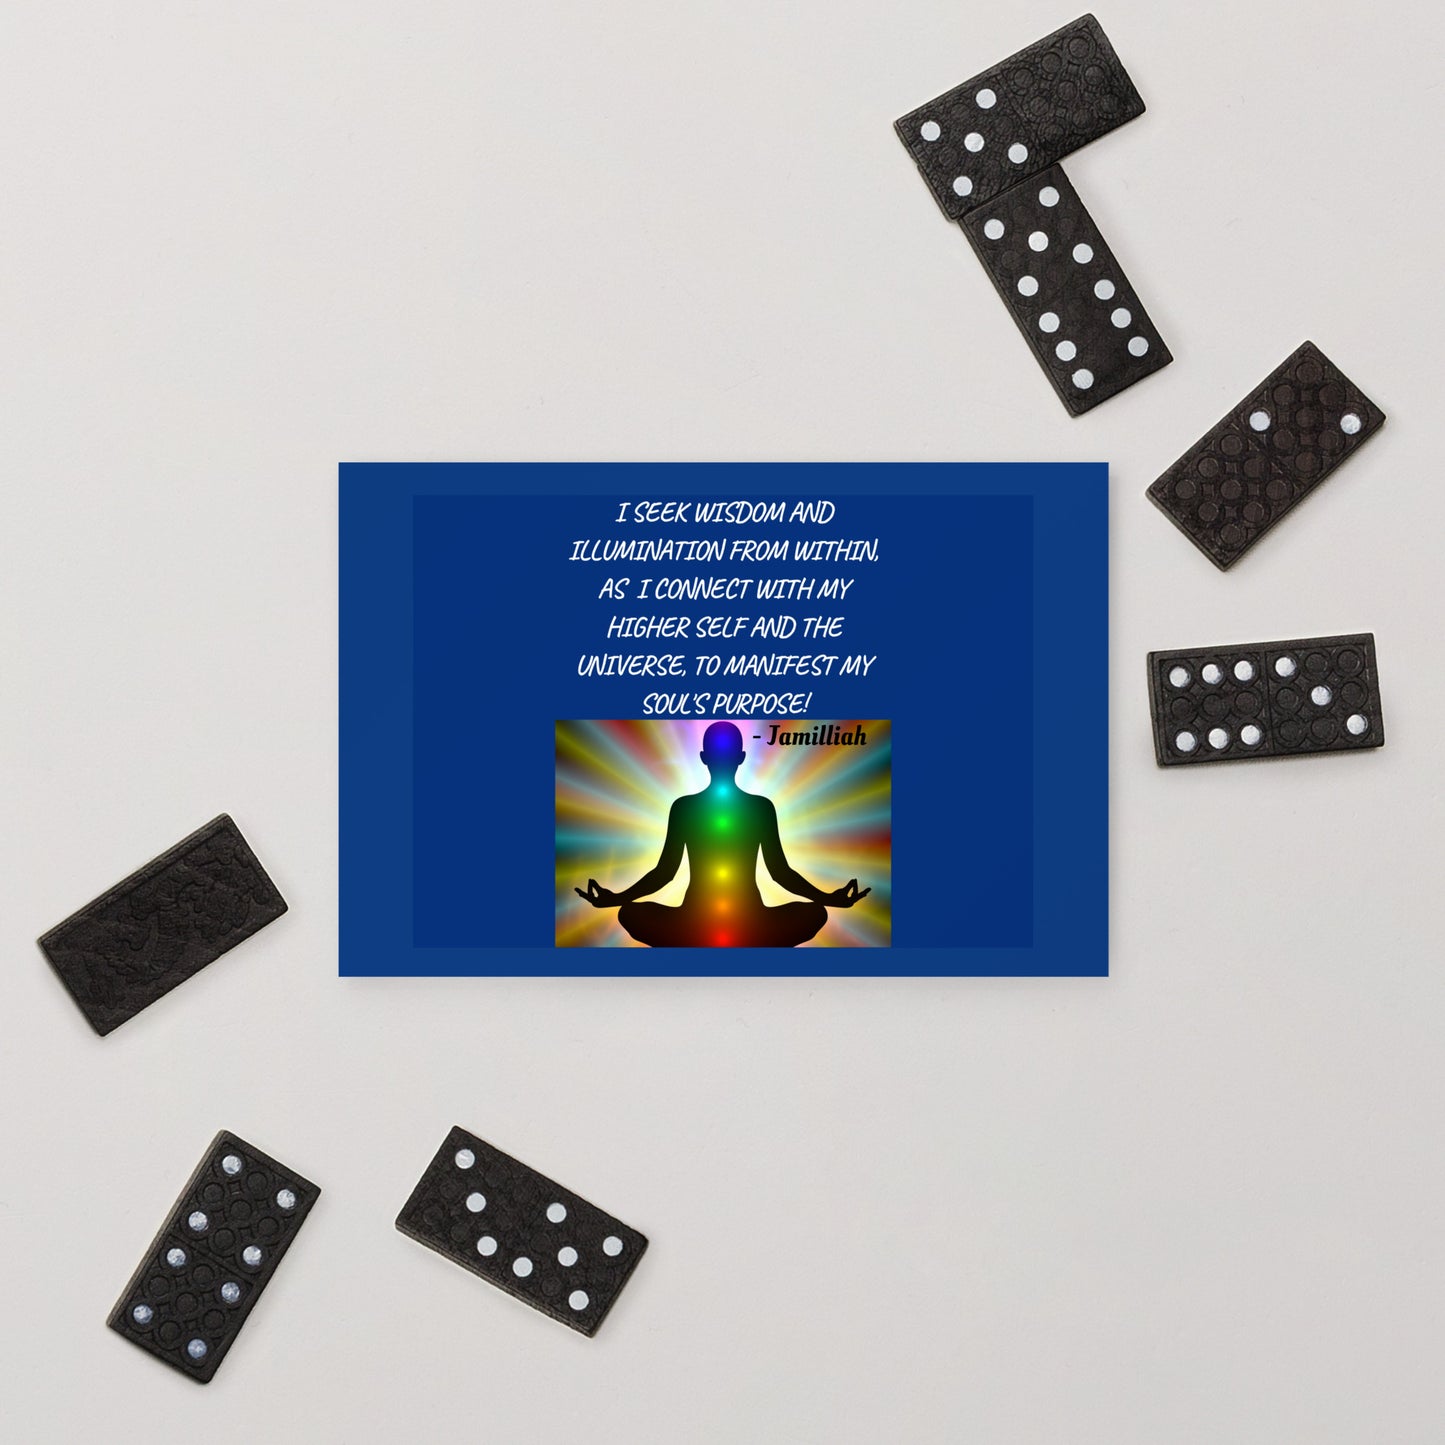 Postcard designed with zen image of a being in lotus pose, having balanced chakras, surrounded by rainbow light aura. Original wise quote mantra. "I Seek Wisdom And Illumination From Within, As I Connect With My Higher Self And The Universe, To Manifest My Soul's Purpose!" - Jamilliah. Postcard shown with dominoes. JAMILLIAH'S WISDOM IS TIMELESS SHOP - wisdomistimeless.com.